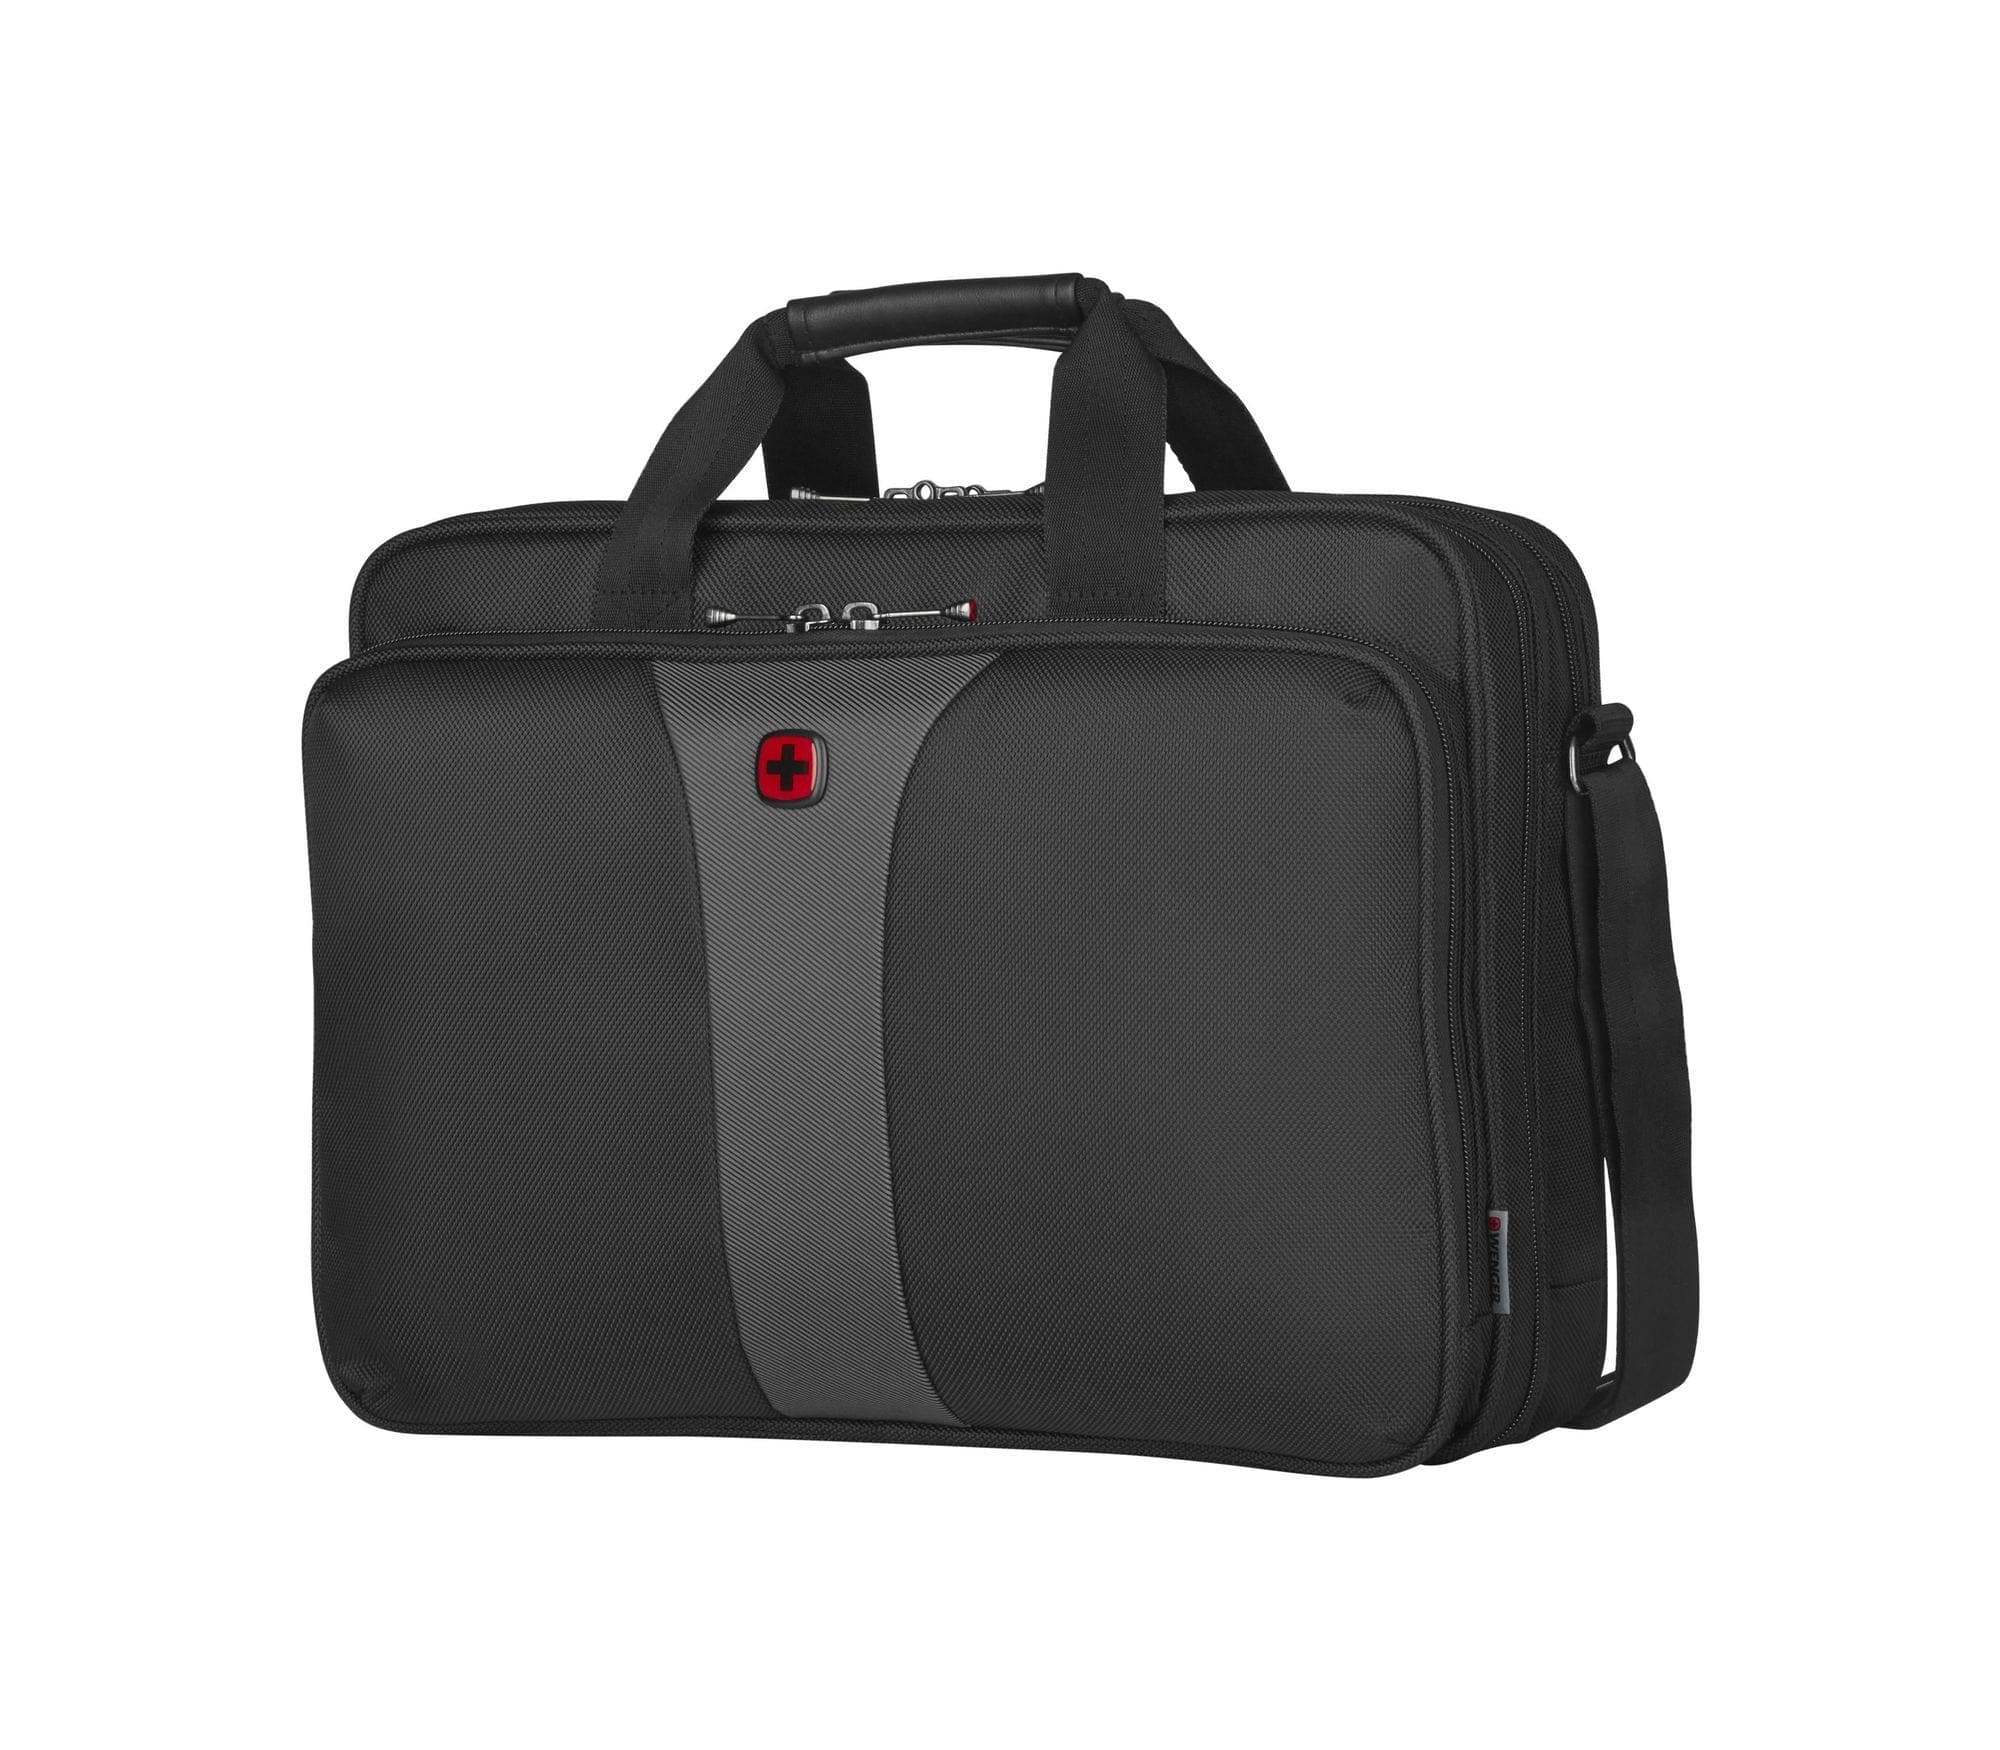 WENGER LEGACY 16 DOUBLE-GUSSET COMPUTER BRIEFCASE BLACK/GREY - 600648